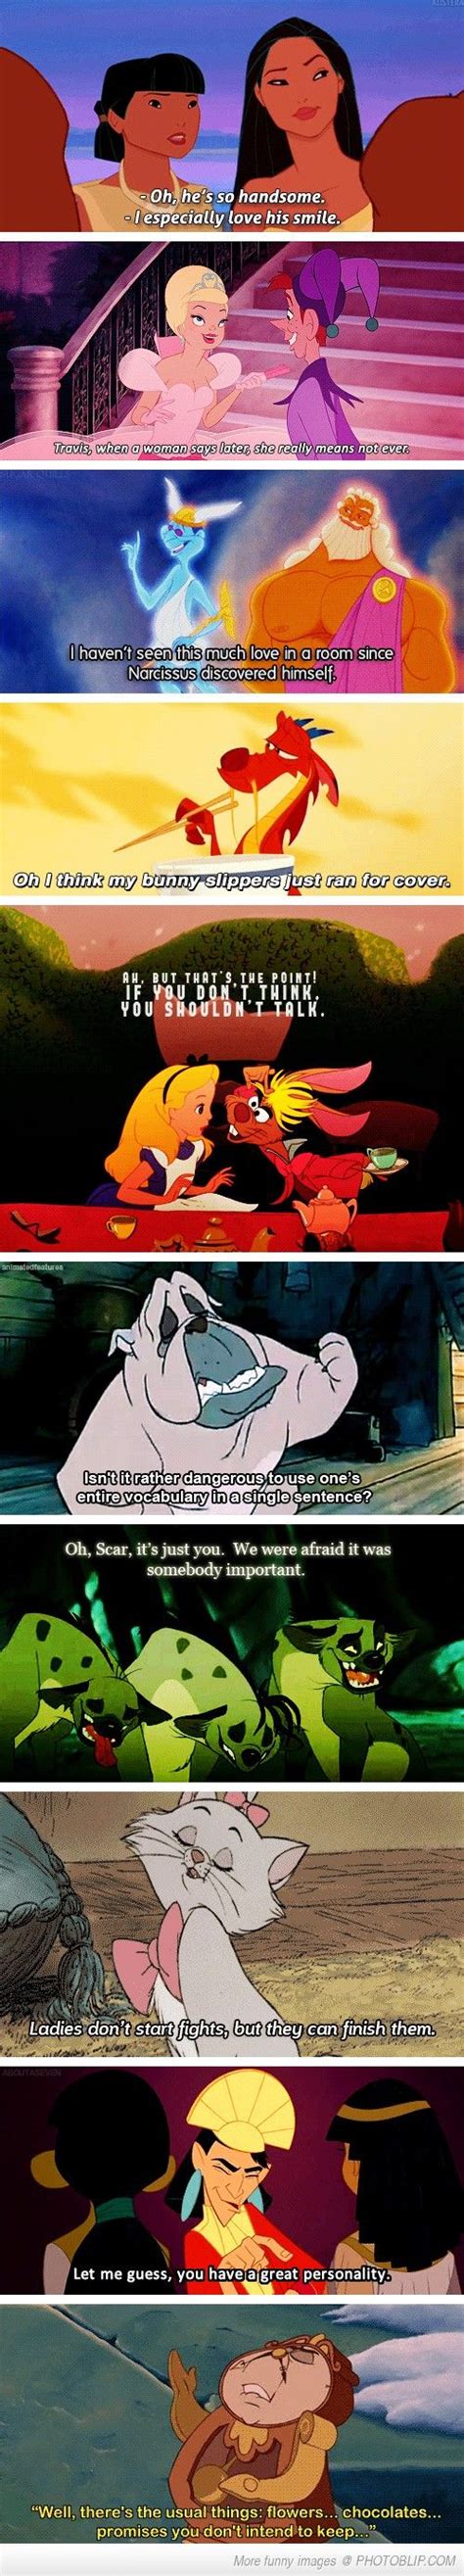 90 Best Images About Naughty Disney On Pinterest Disney